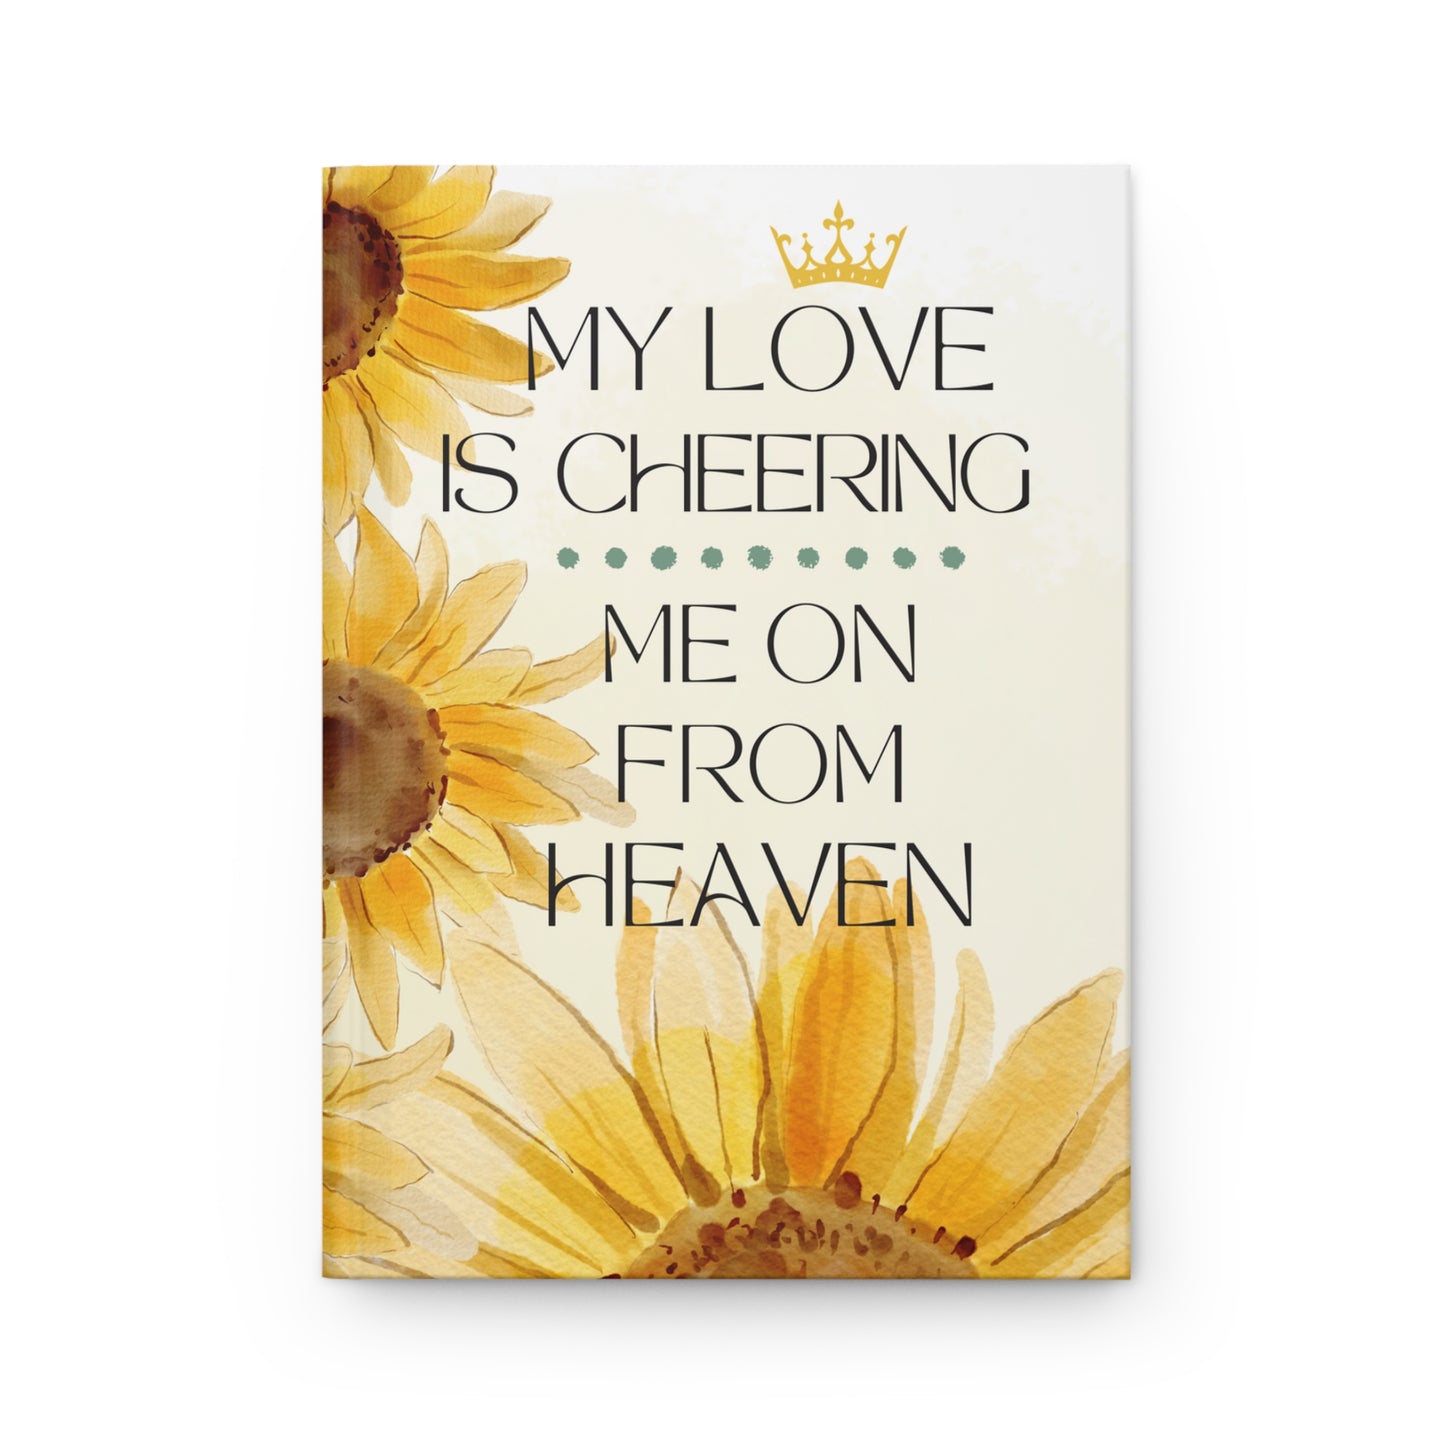 Grief Journal for Loss of Loved One, Cheering Me On From Heaven